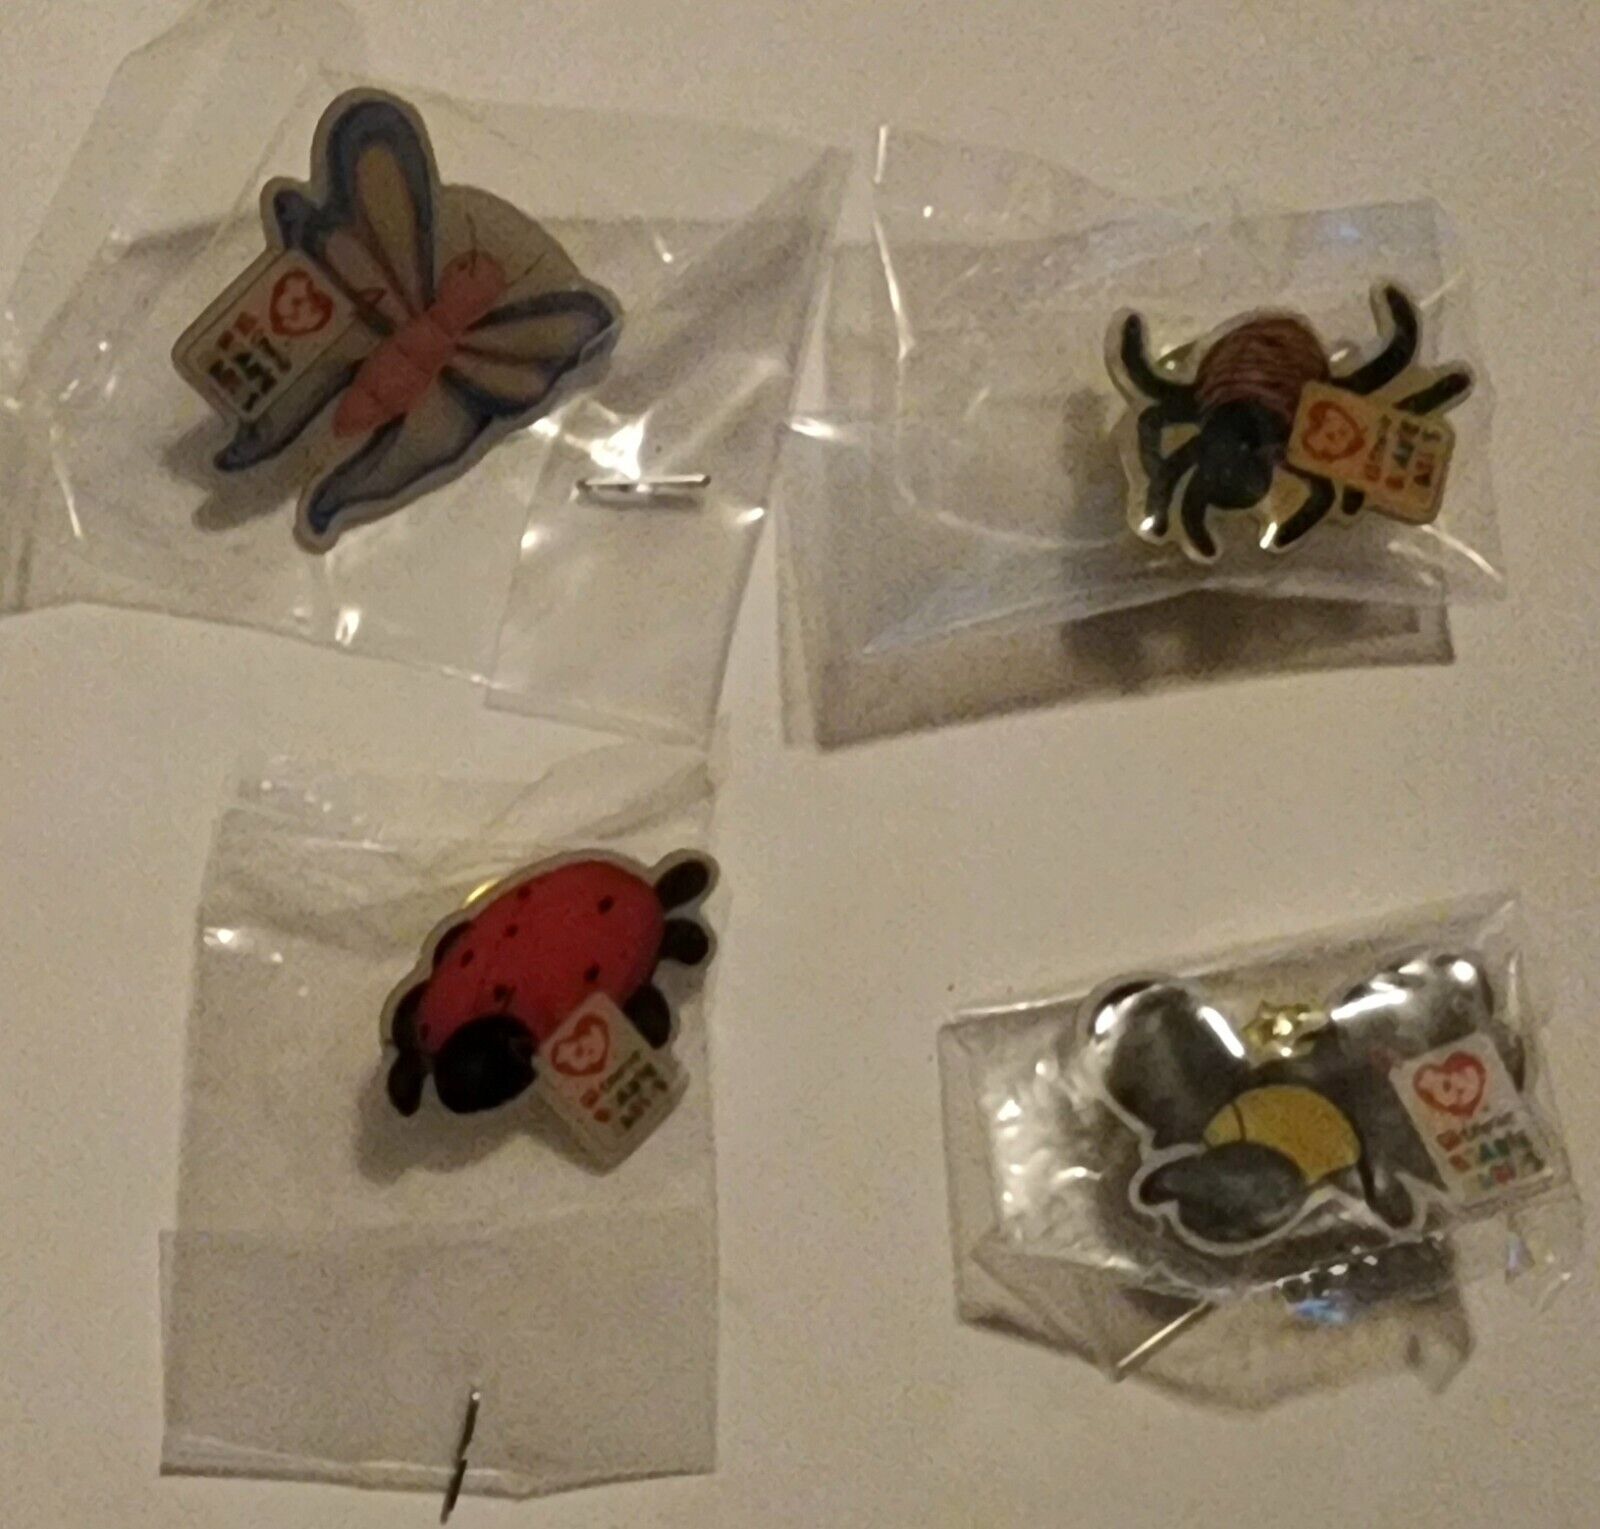 VINTAGE 2000s MCDONALDS CREW BEANIE BABY TY INSECT SET OF 4